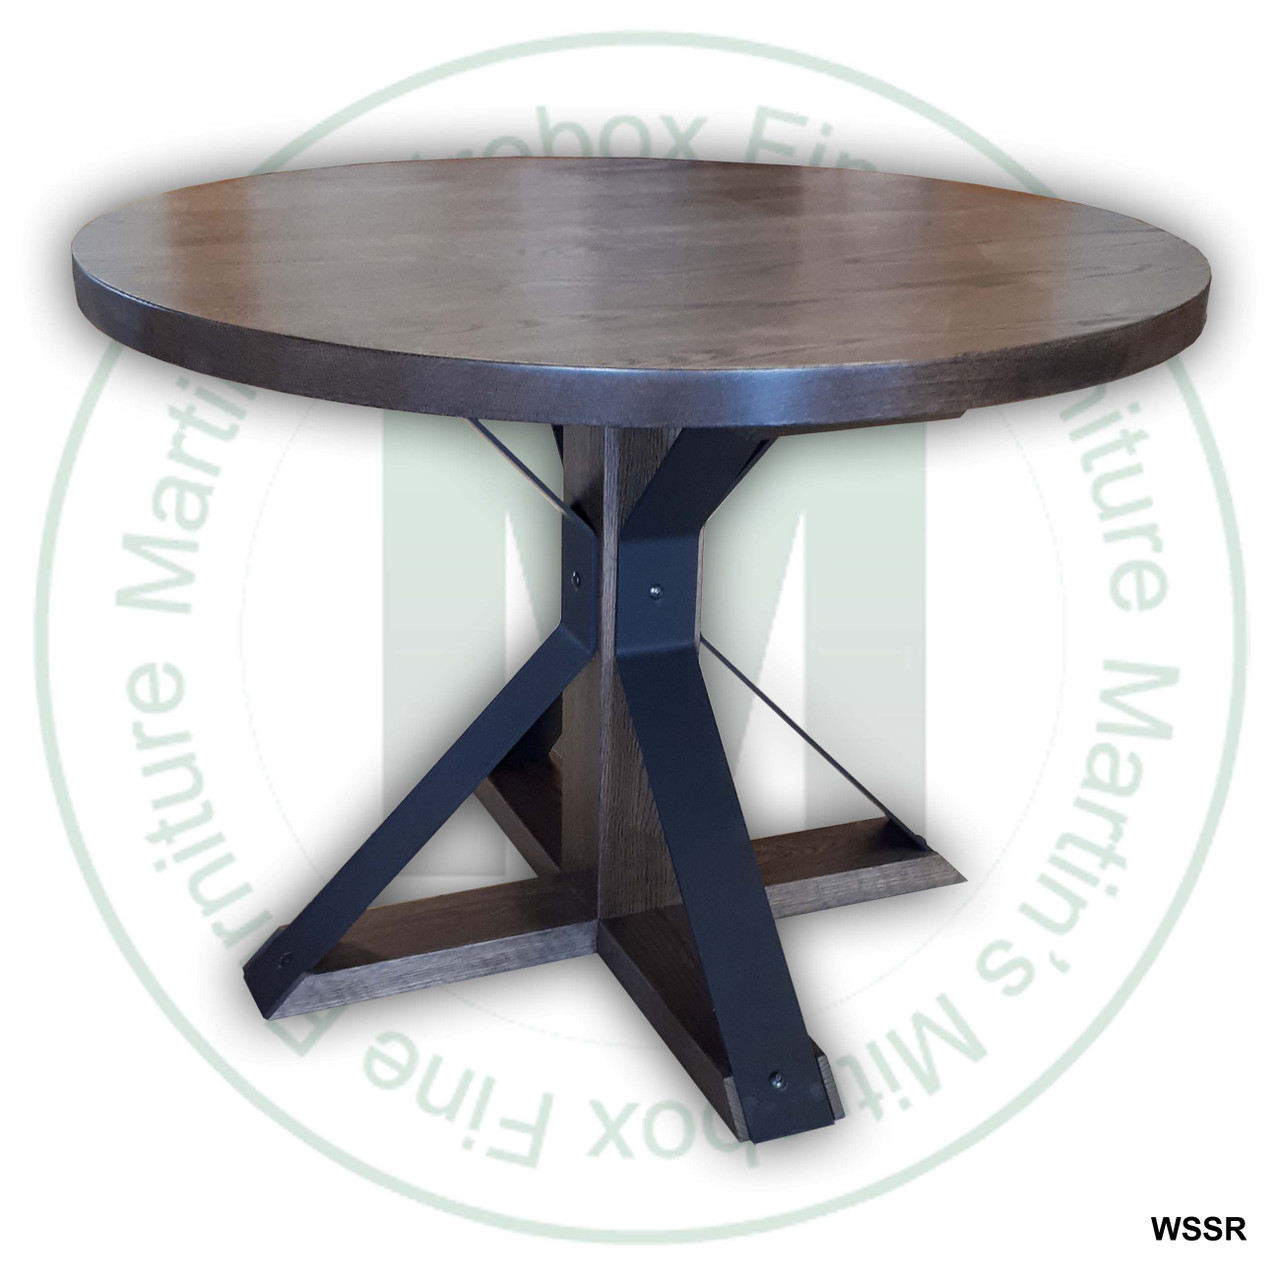 Wormy Maple Hyde Single Pedestal Table 48''D x 48''W x 30''H Round Solid Table. Table Has 1.75'' Thick Top.